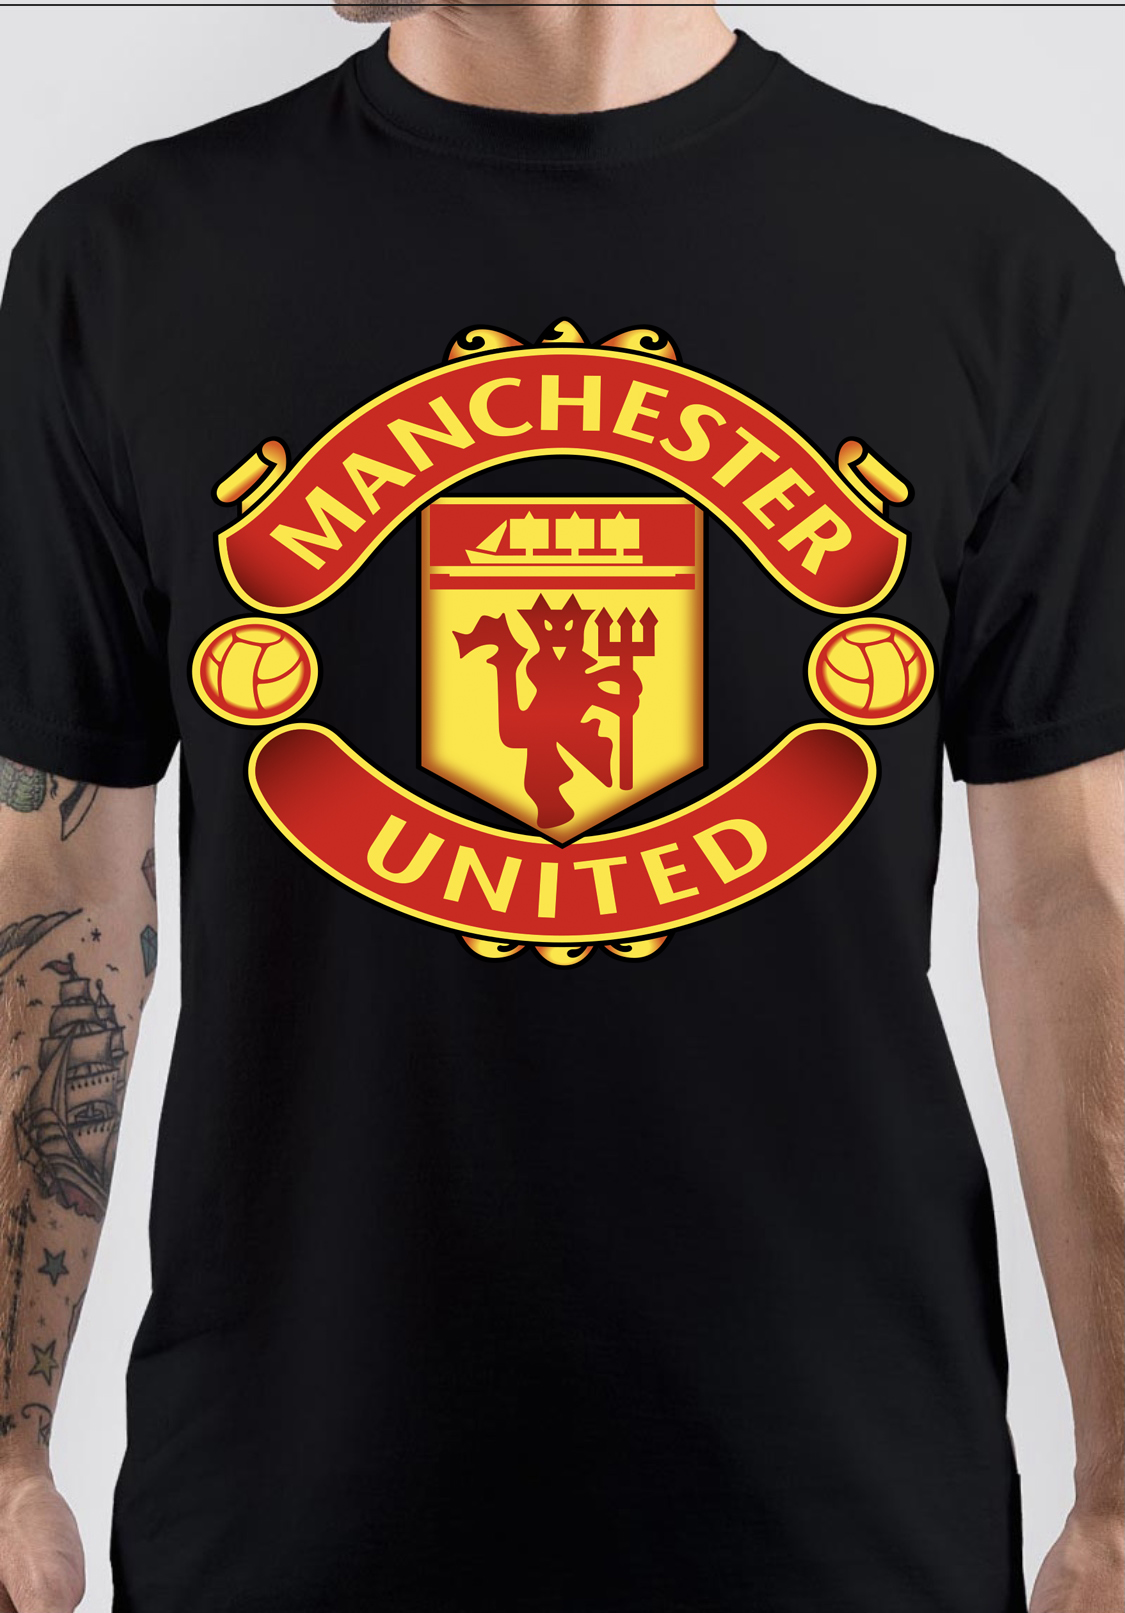 Manchester United F.C. T-Shirt And Merchandise